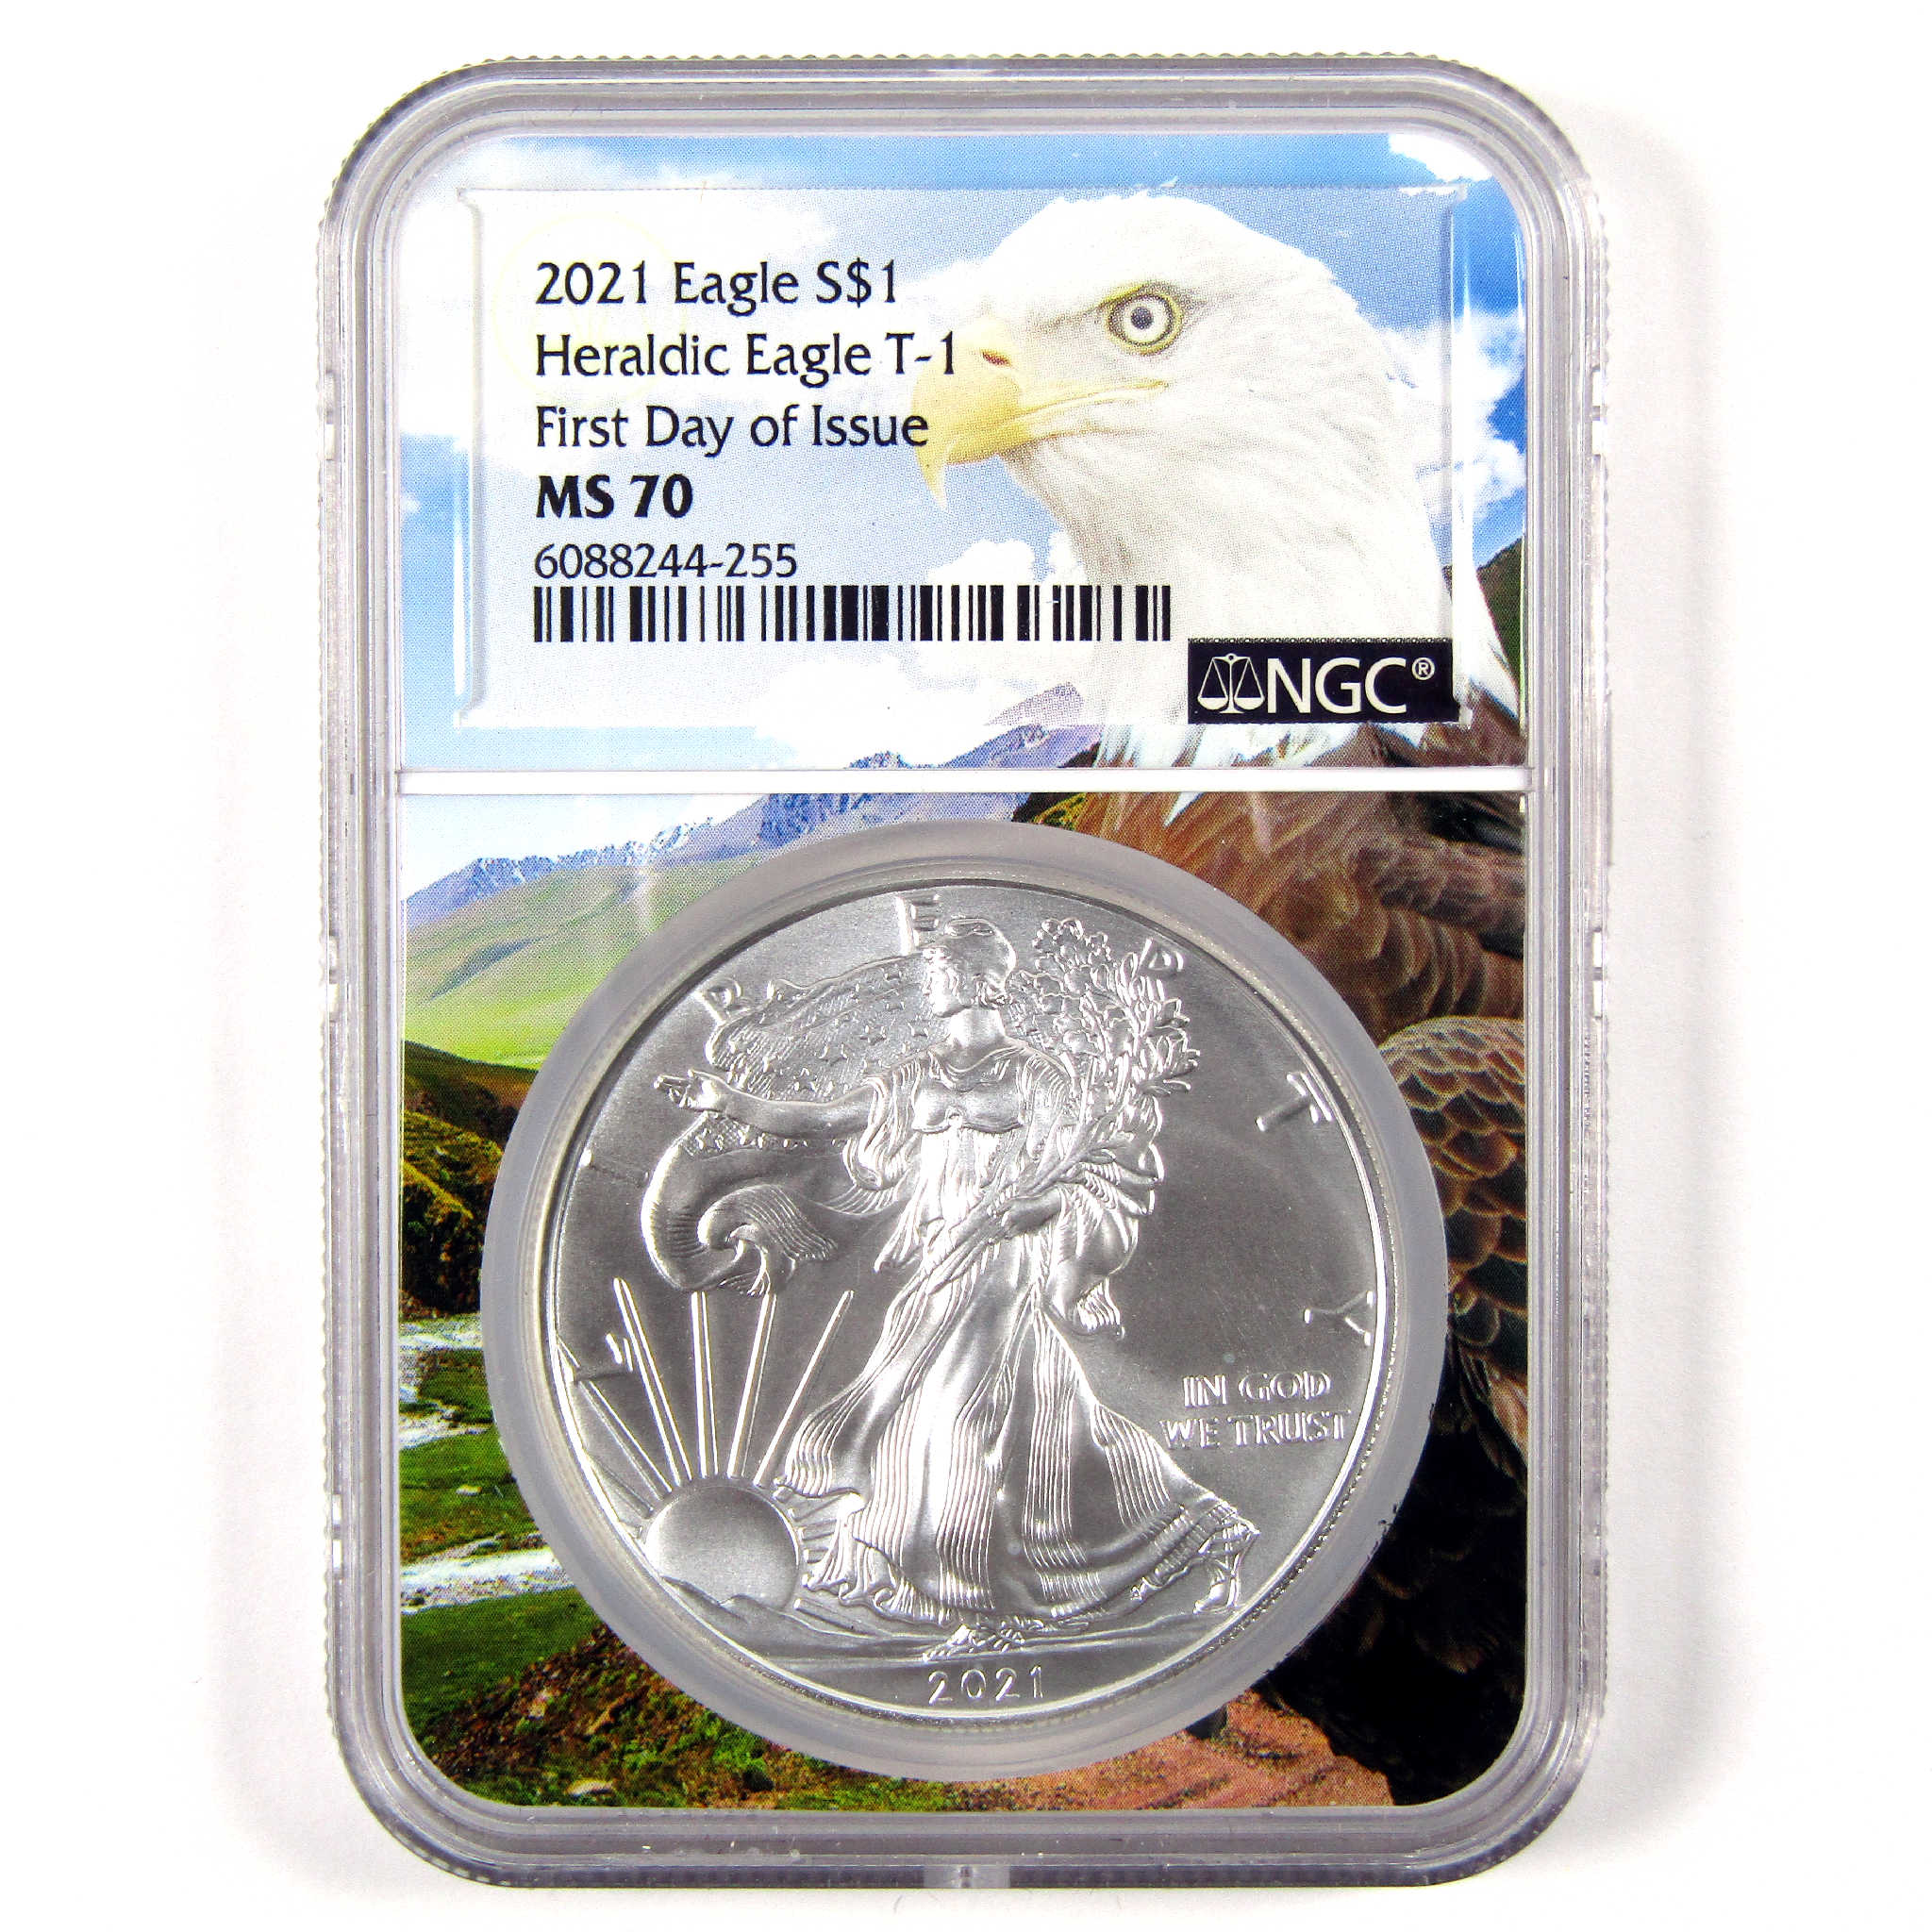 2021 T1 American Silver Eagle MS 70 NGC $1 Unc 1st Day SKU:CPC6446